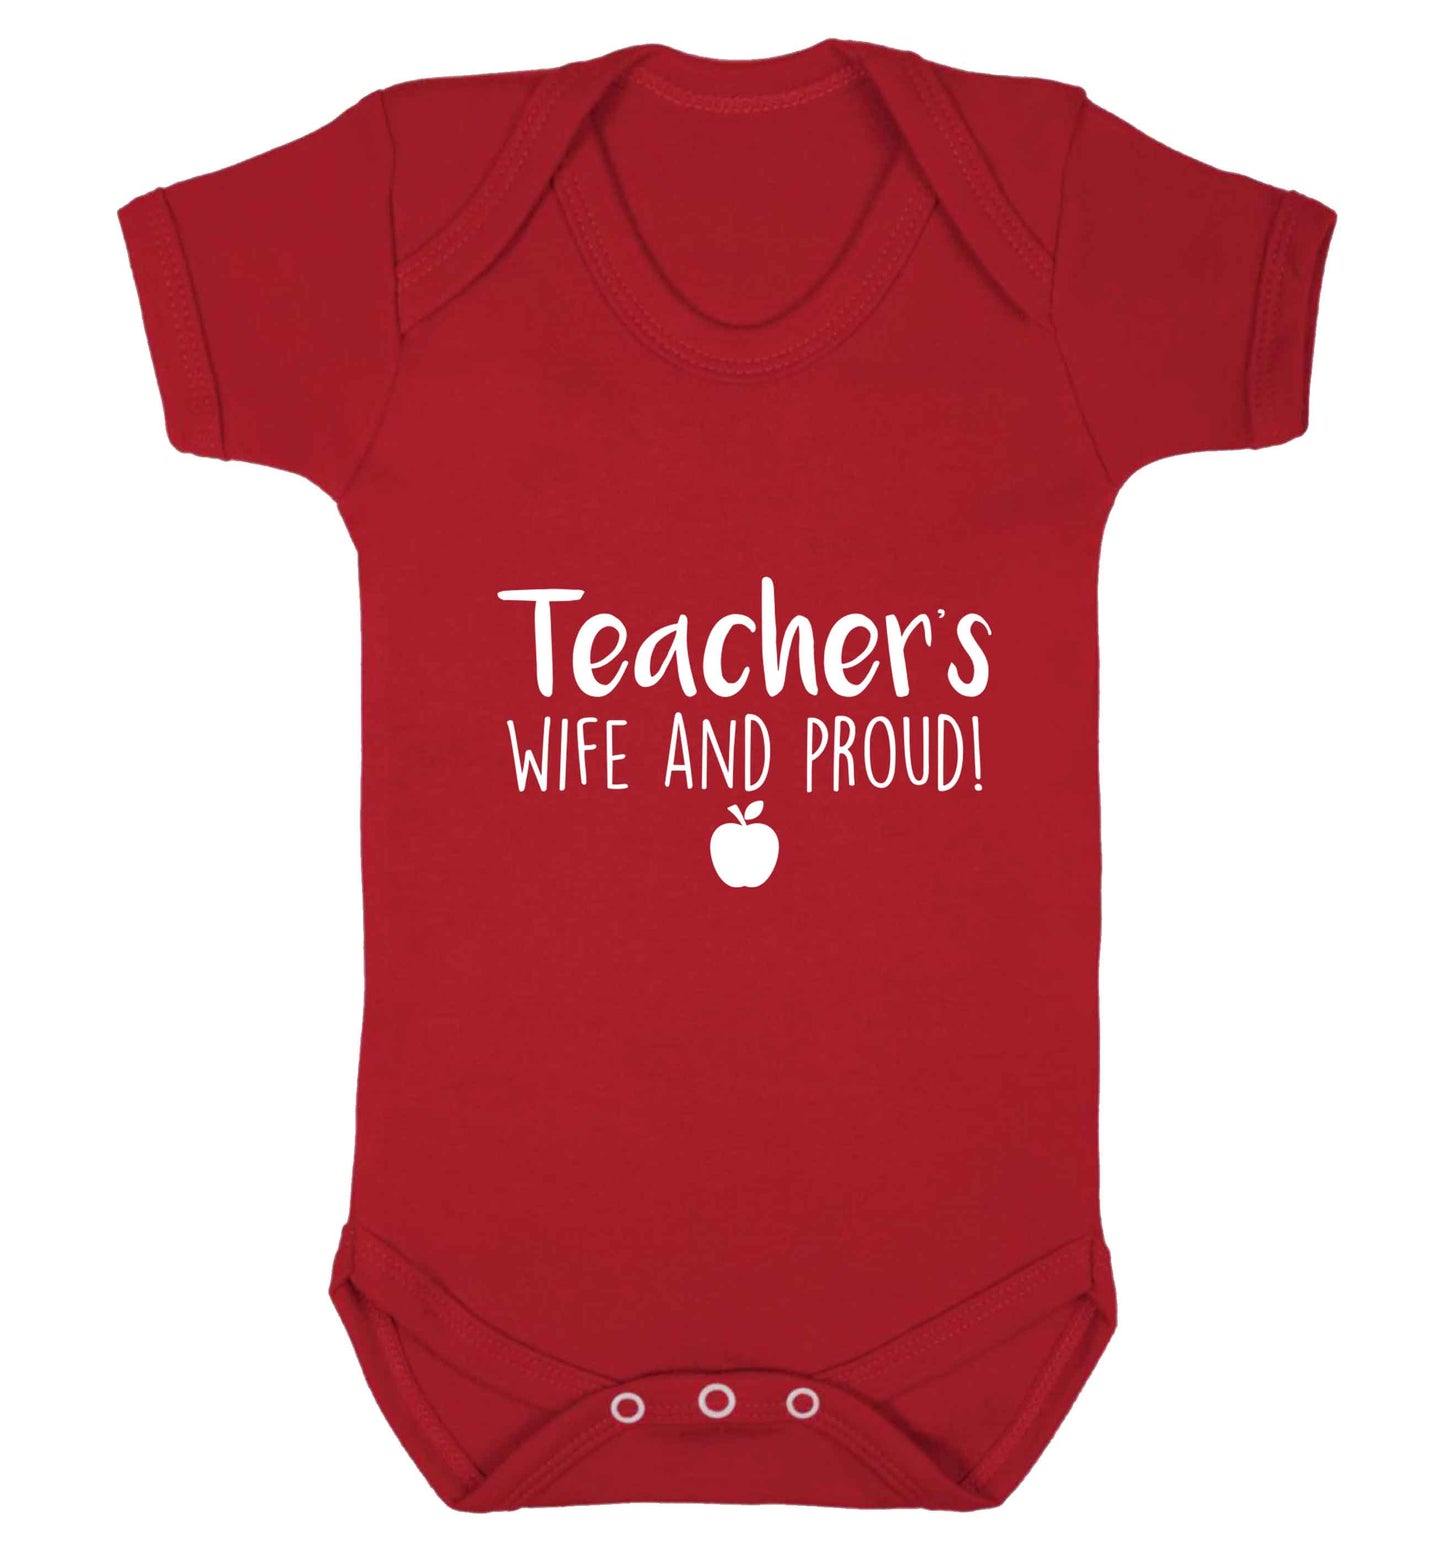 Teachers wife and proud baby vest red 18-24 months